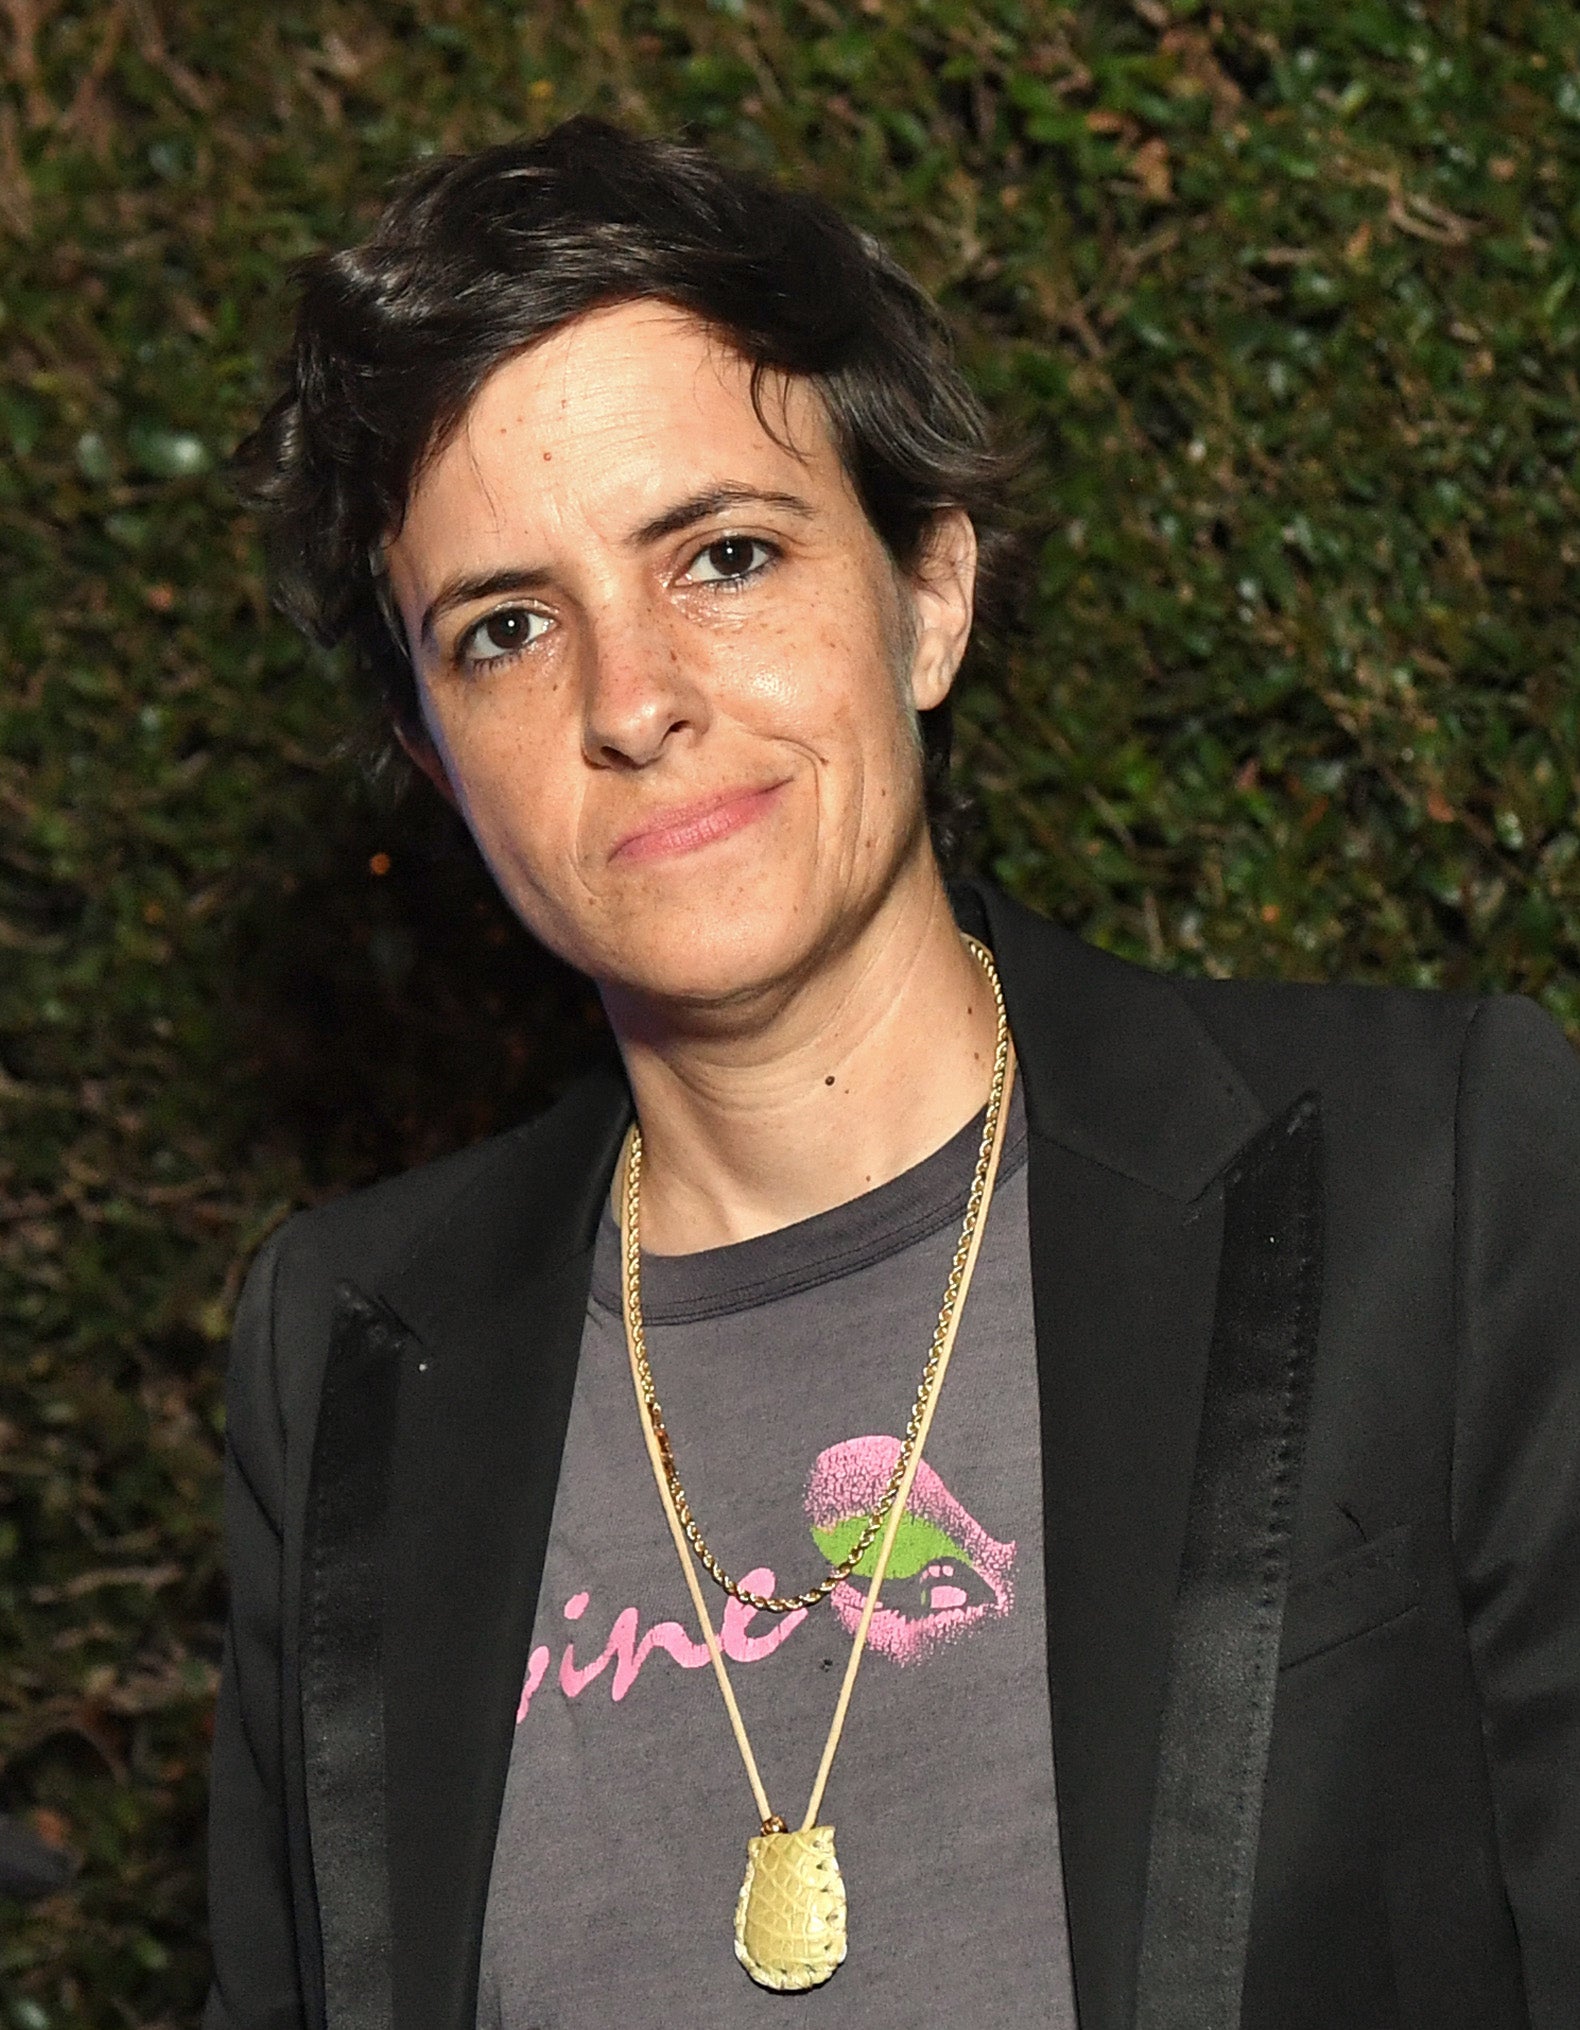 Samantha Ronson with a headset around her neck stands by DJ equipment; wears a black blazer over a graphic tee